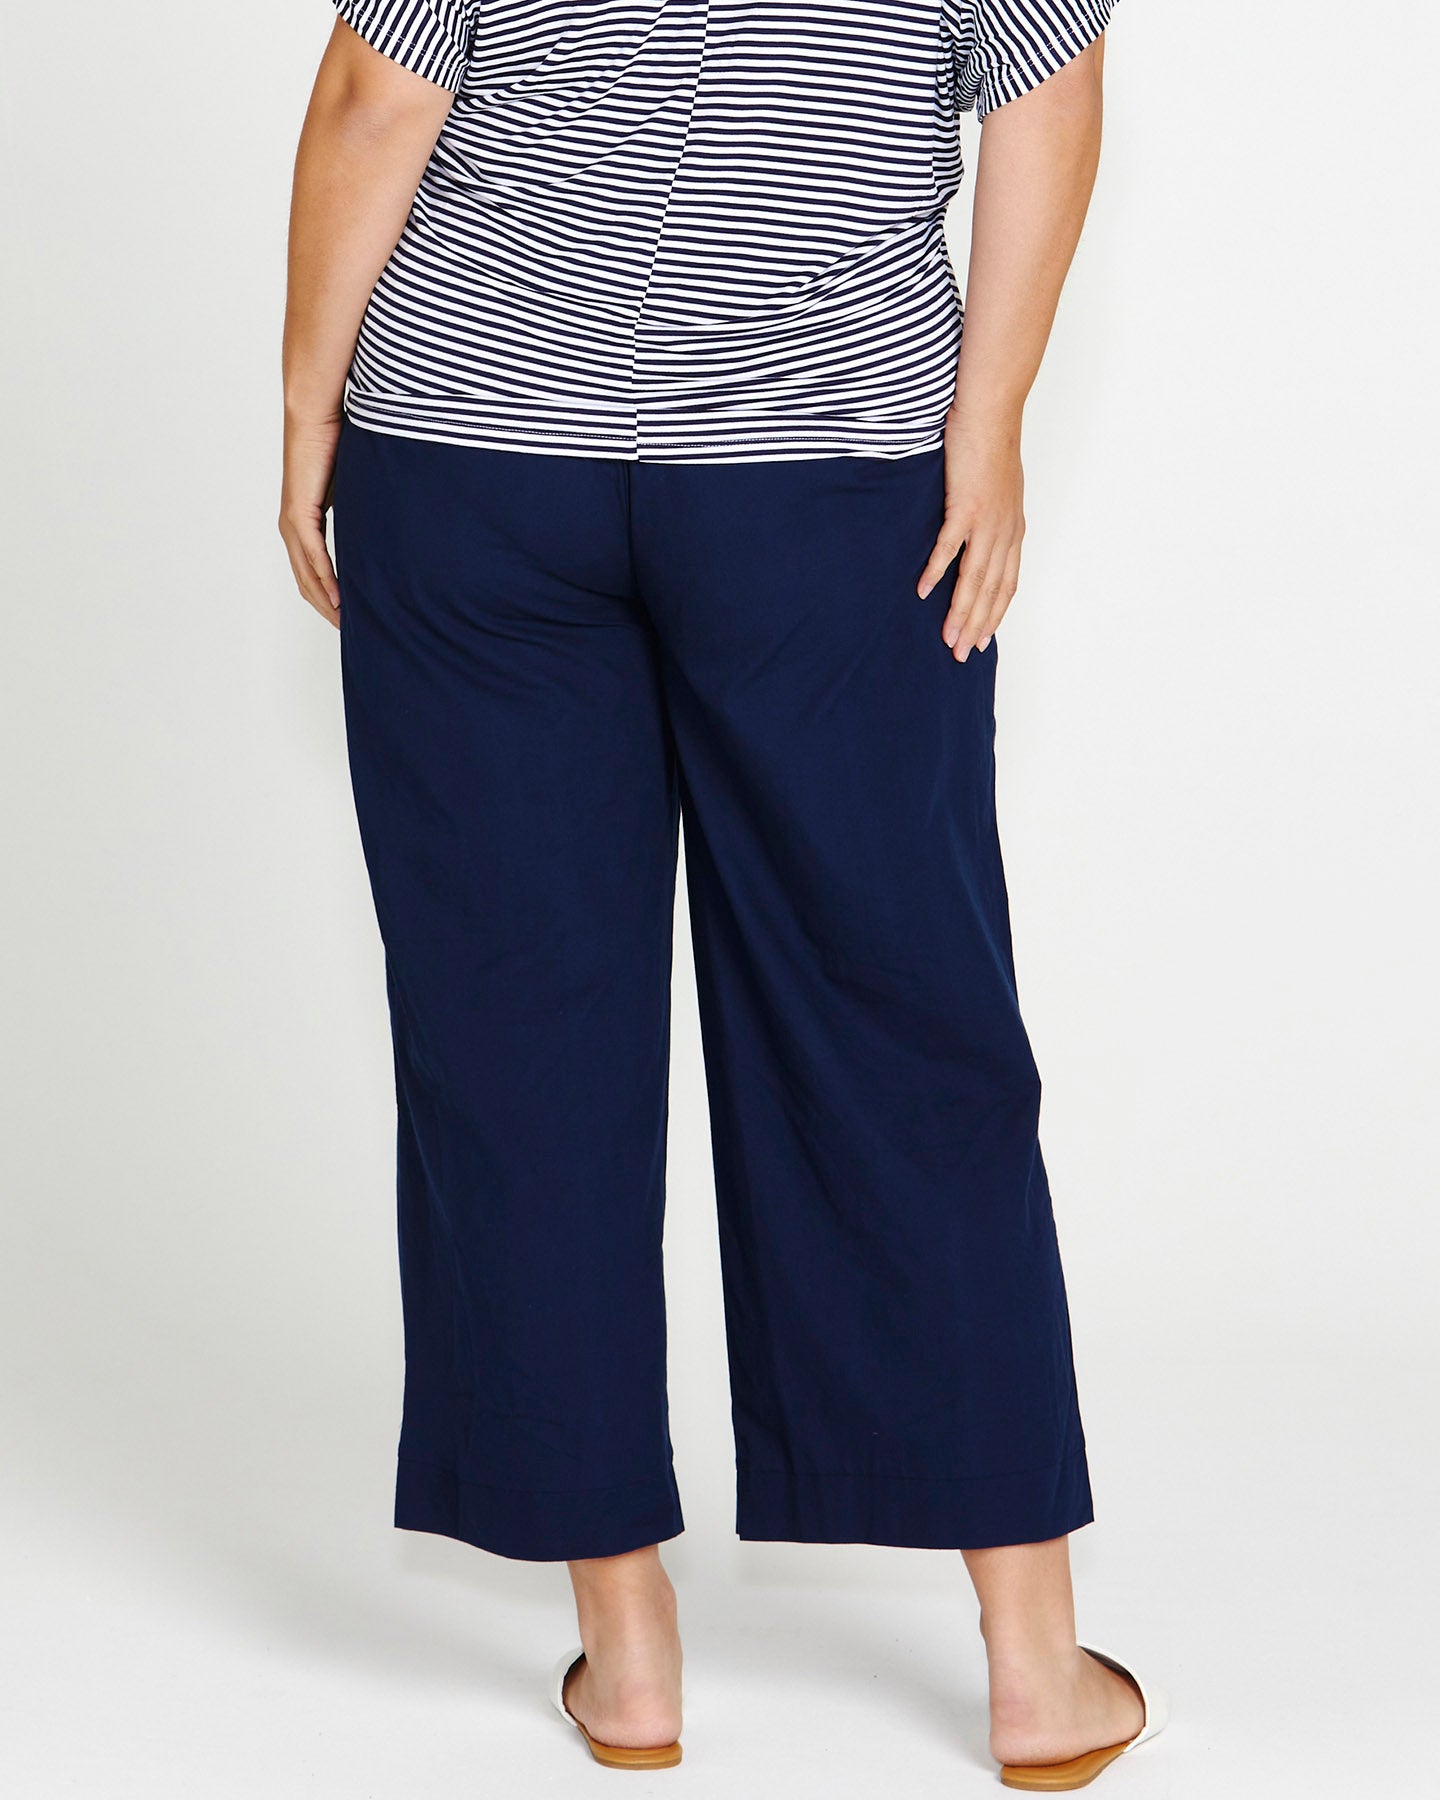 Montague High Waisted Straight Cropped Cotton Pants  - Navy